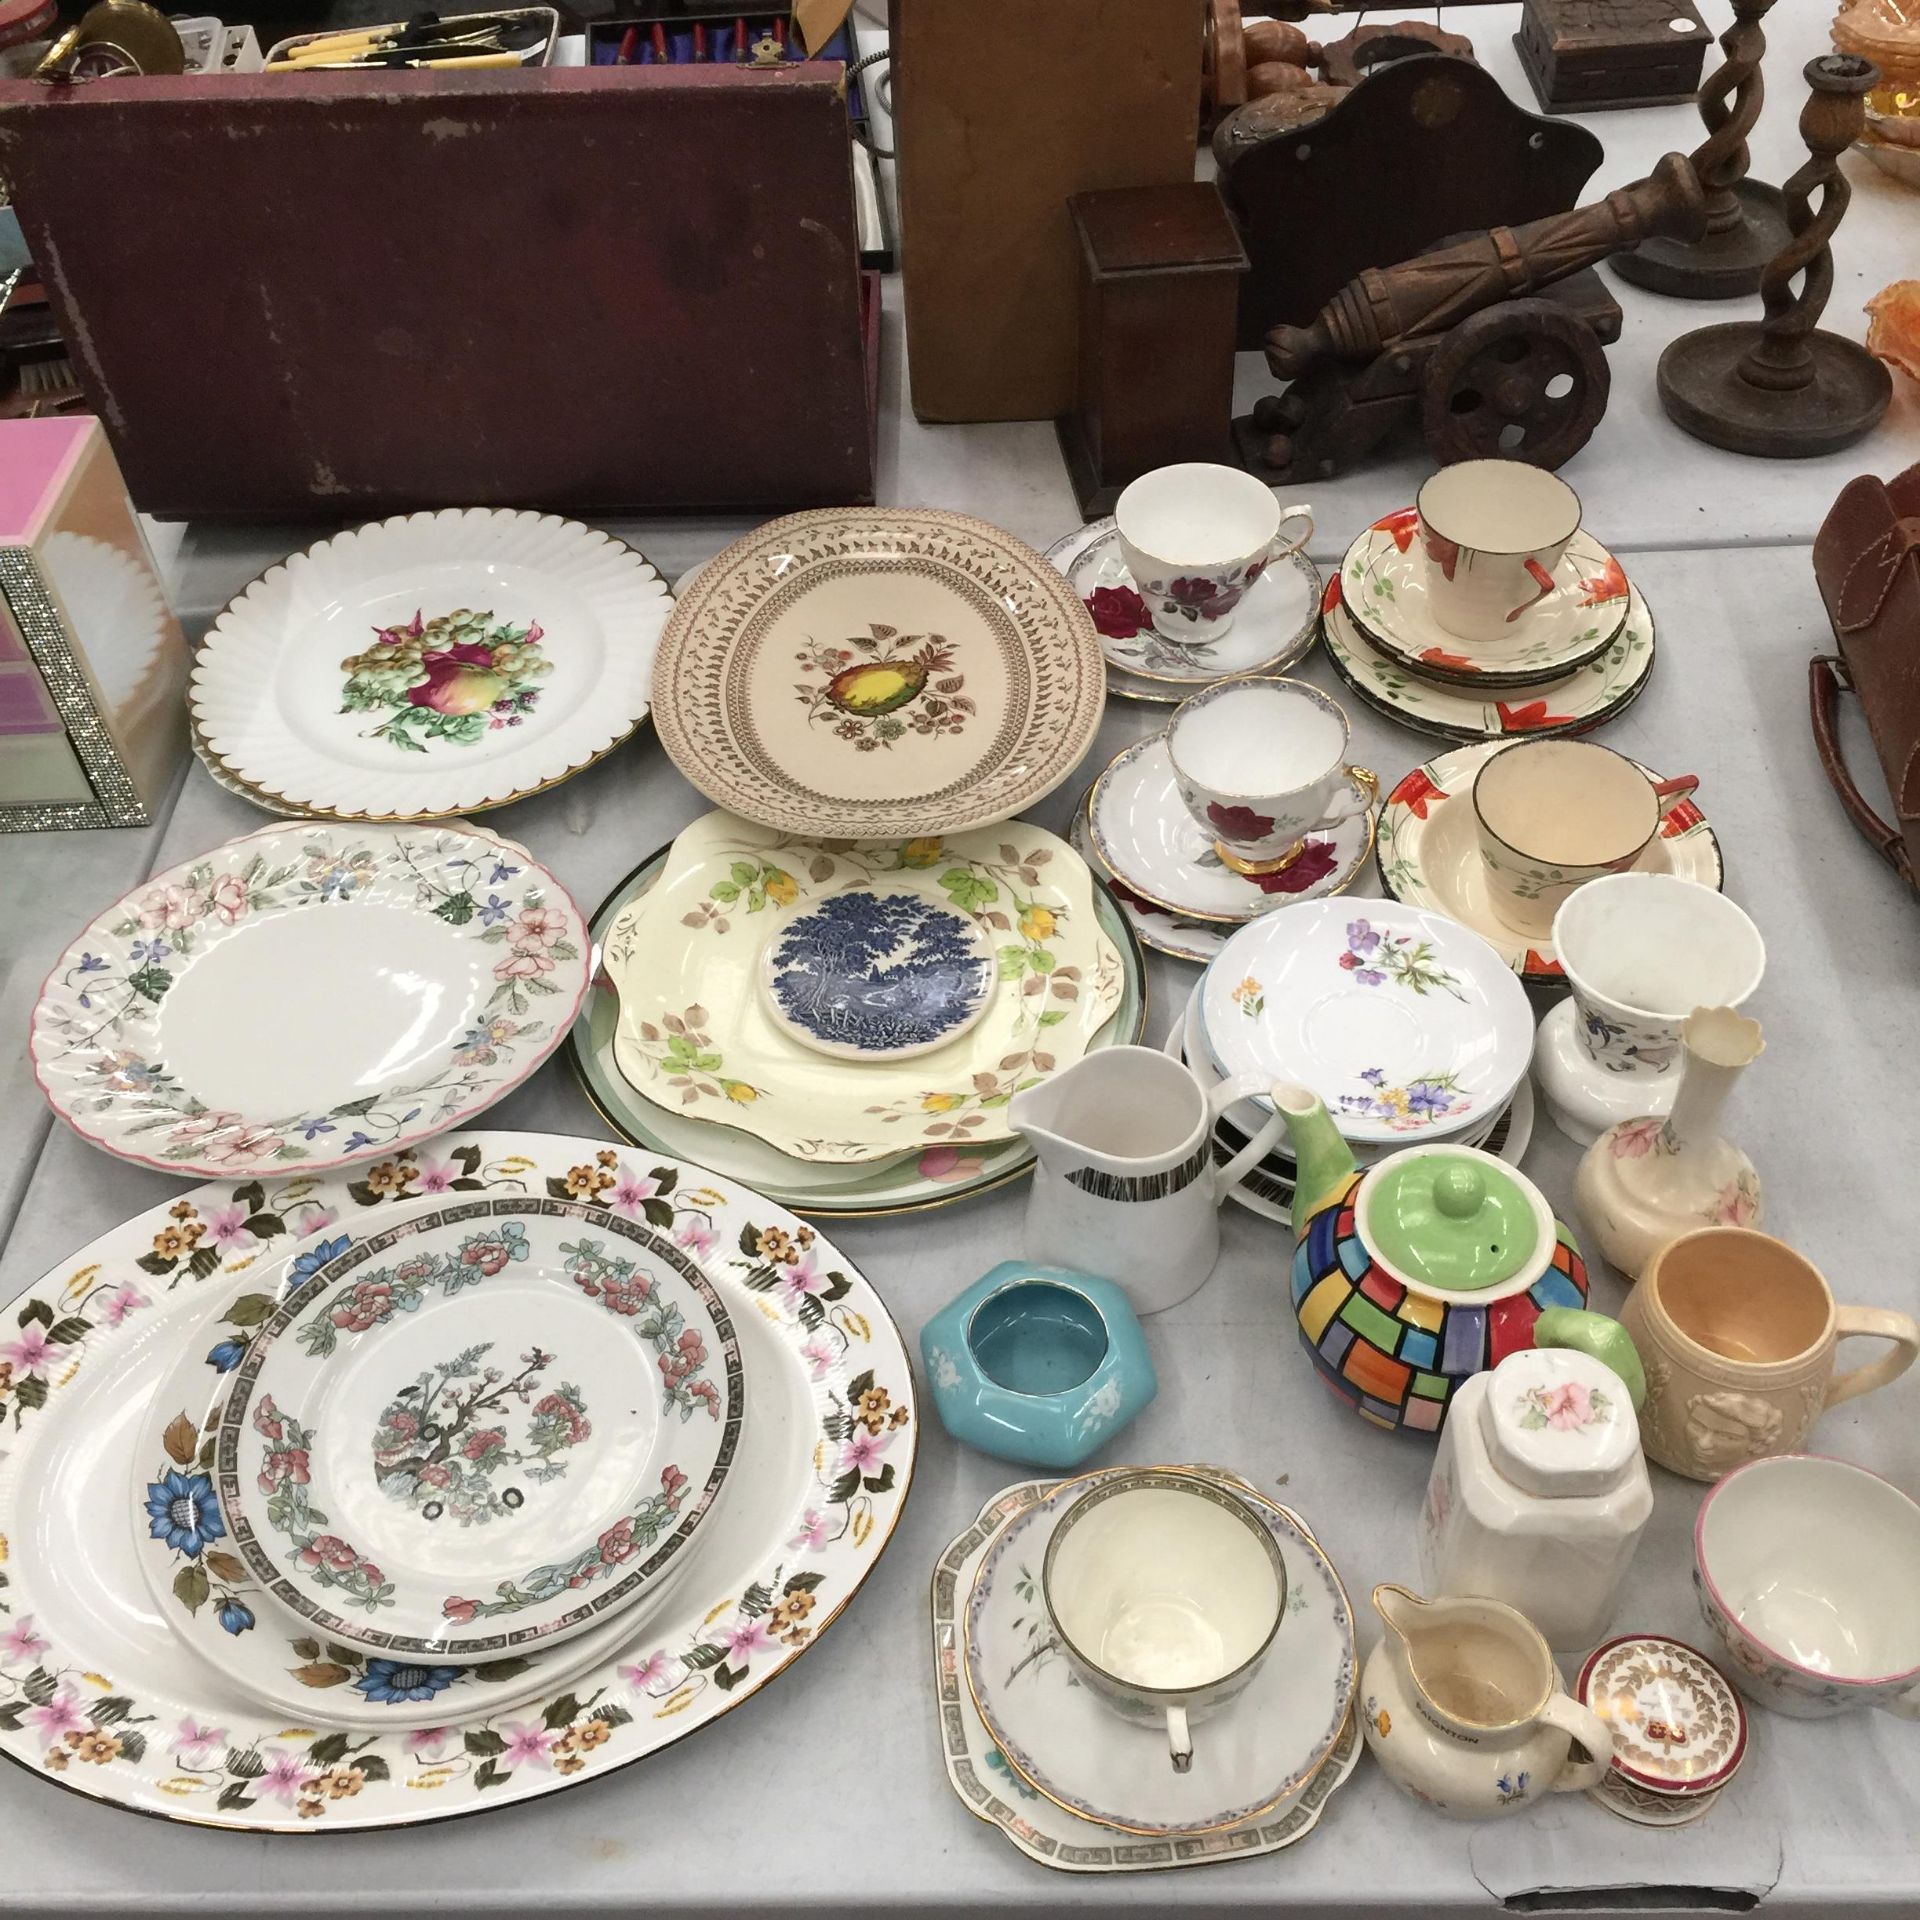 A LARGE QUANTITY OF VINTAGE PLATES, CUPS, SAUCERS, ETC TO INCLUDE ROYAL STAFFORD, SHELLEY SAUCERS,